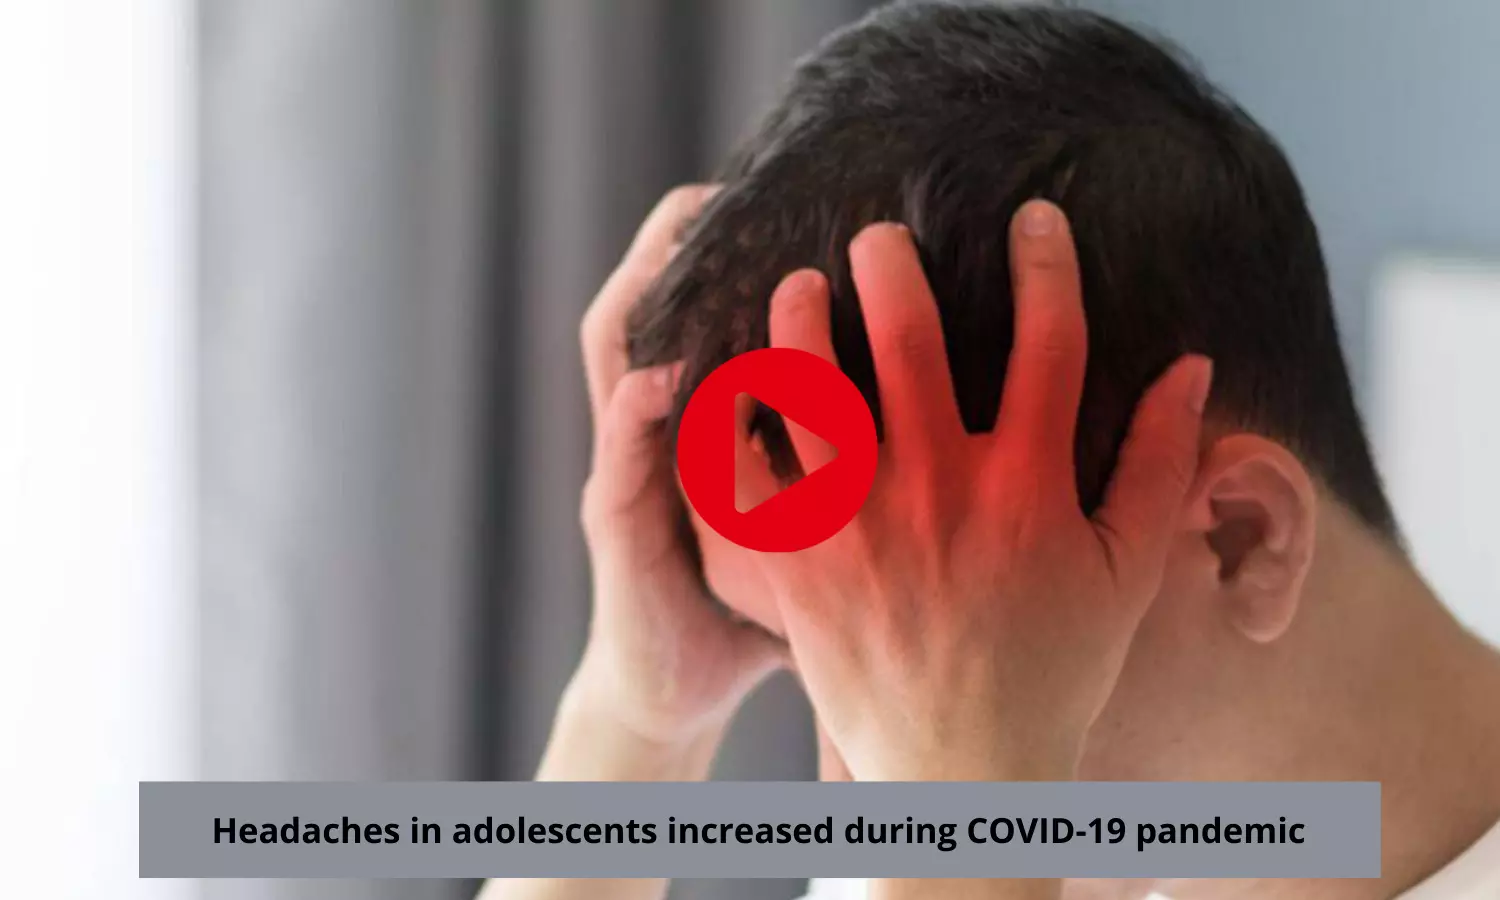 Headaches in adolescents increased during COVID-19 pandemic